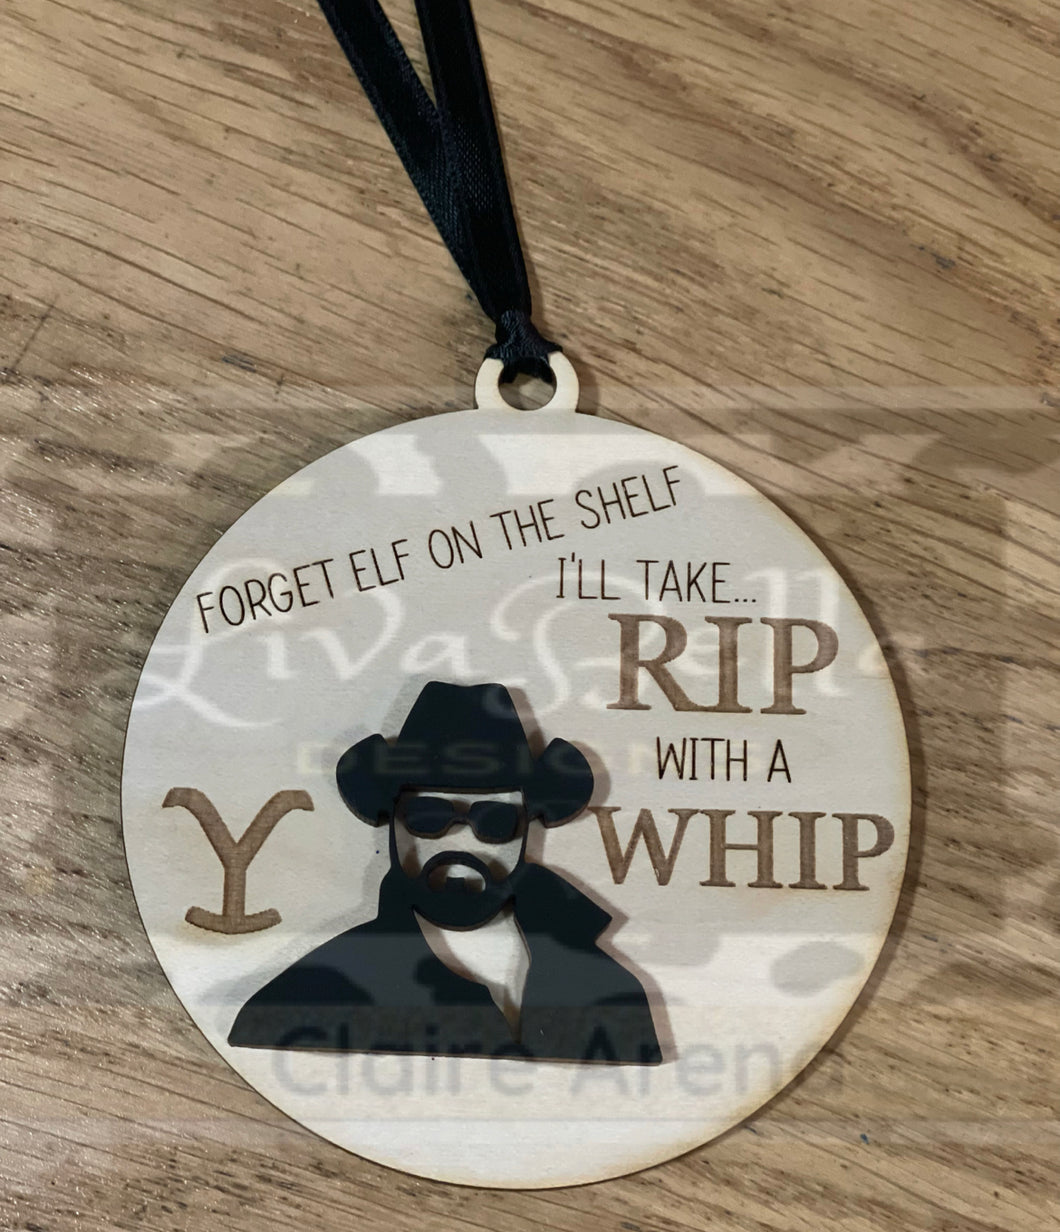 Yellowstone Ornament - Forget Elf on the Shelf, I’ll Take RIP with a Whip